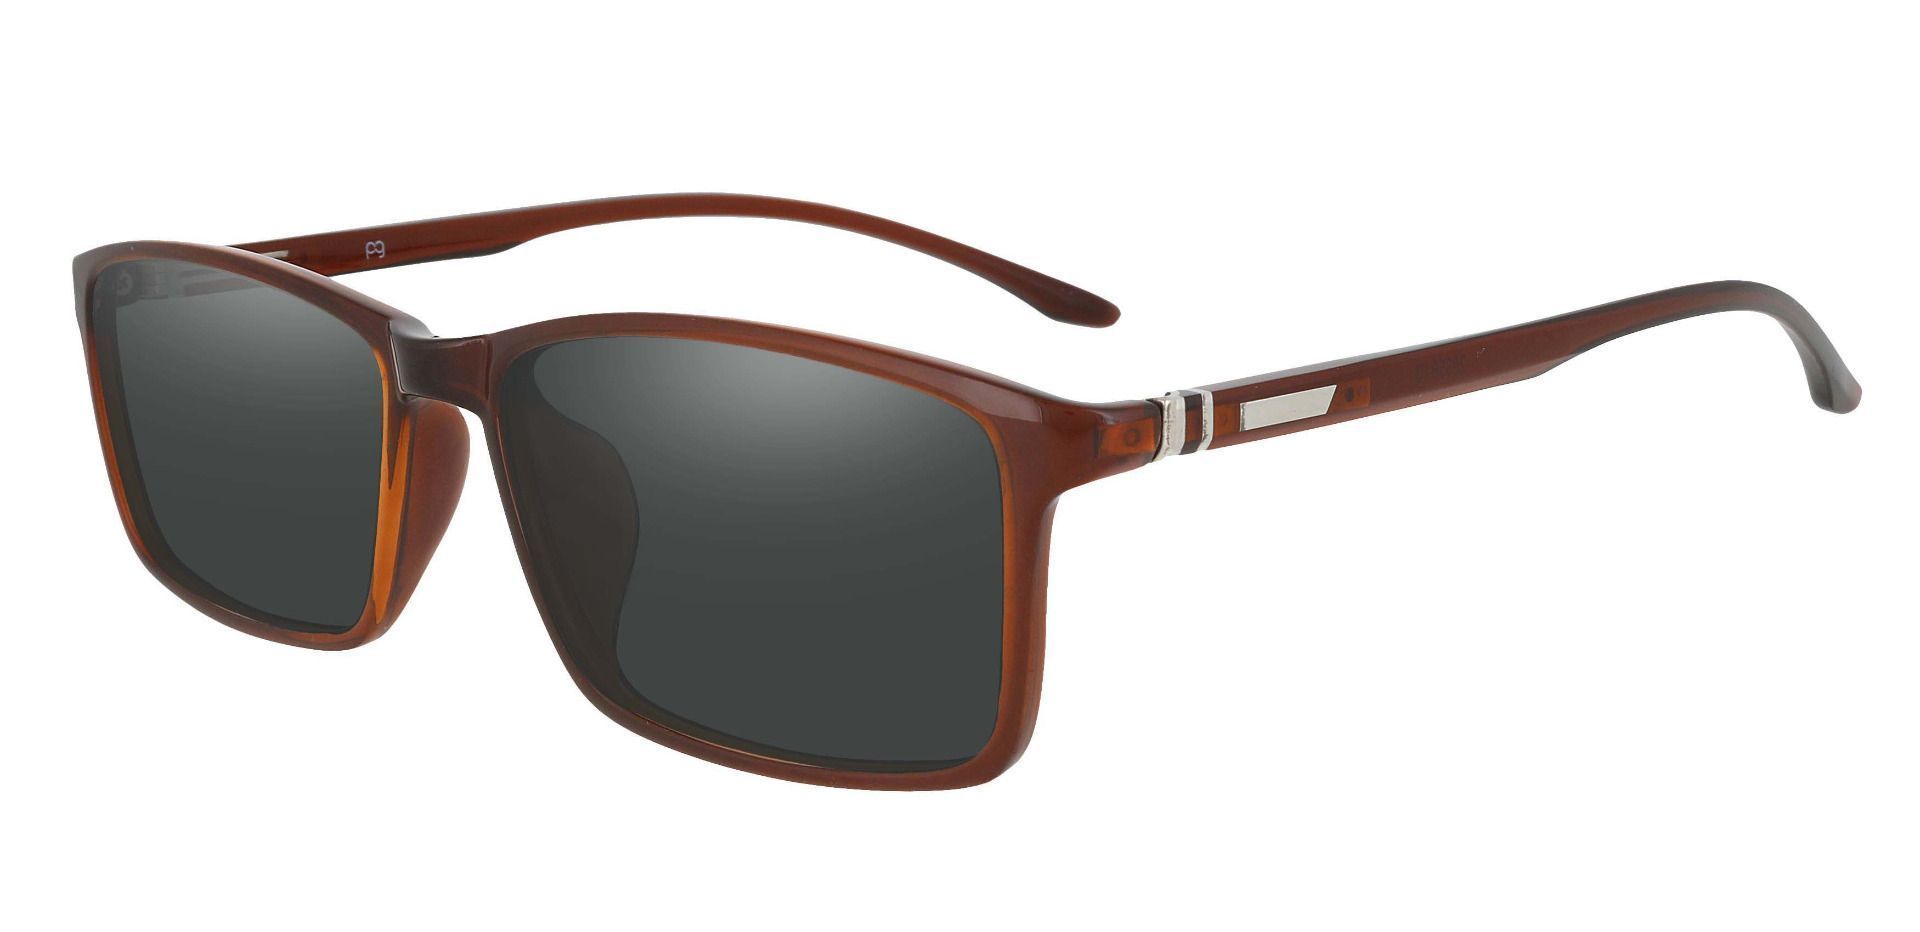 Judah Rectangle Non-Rx Sunglasses - Brown Frame With Gray Lenses